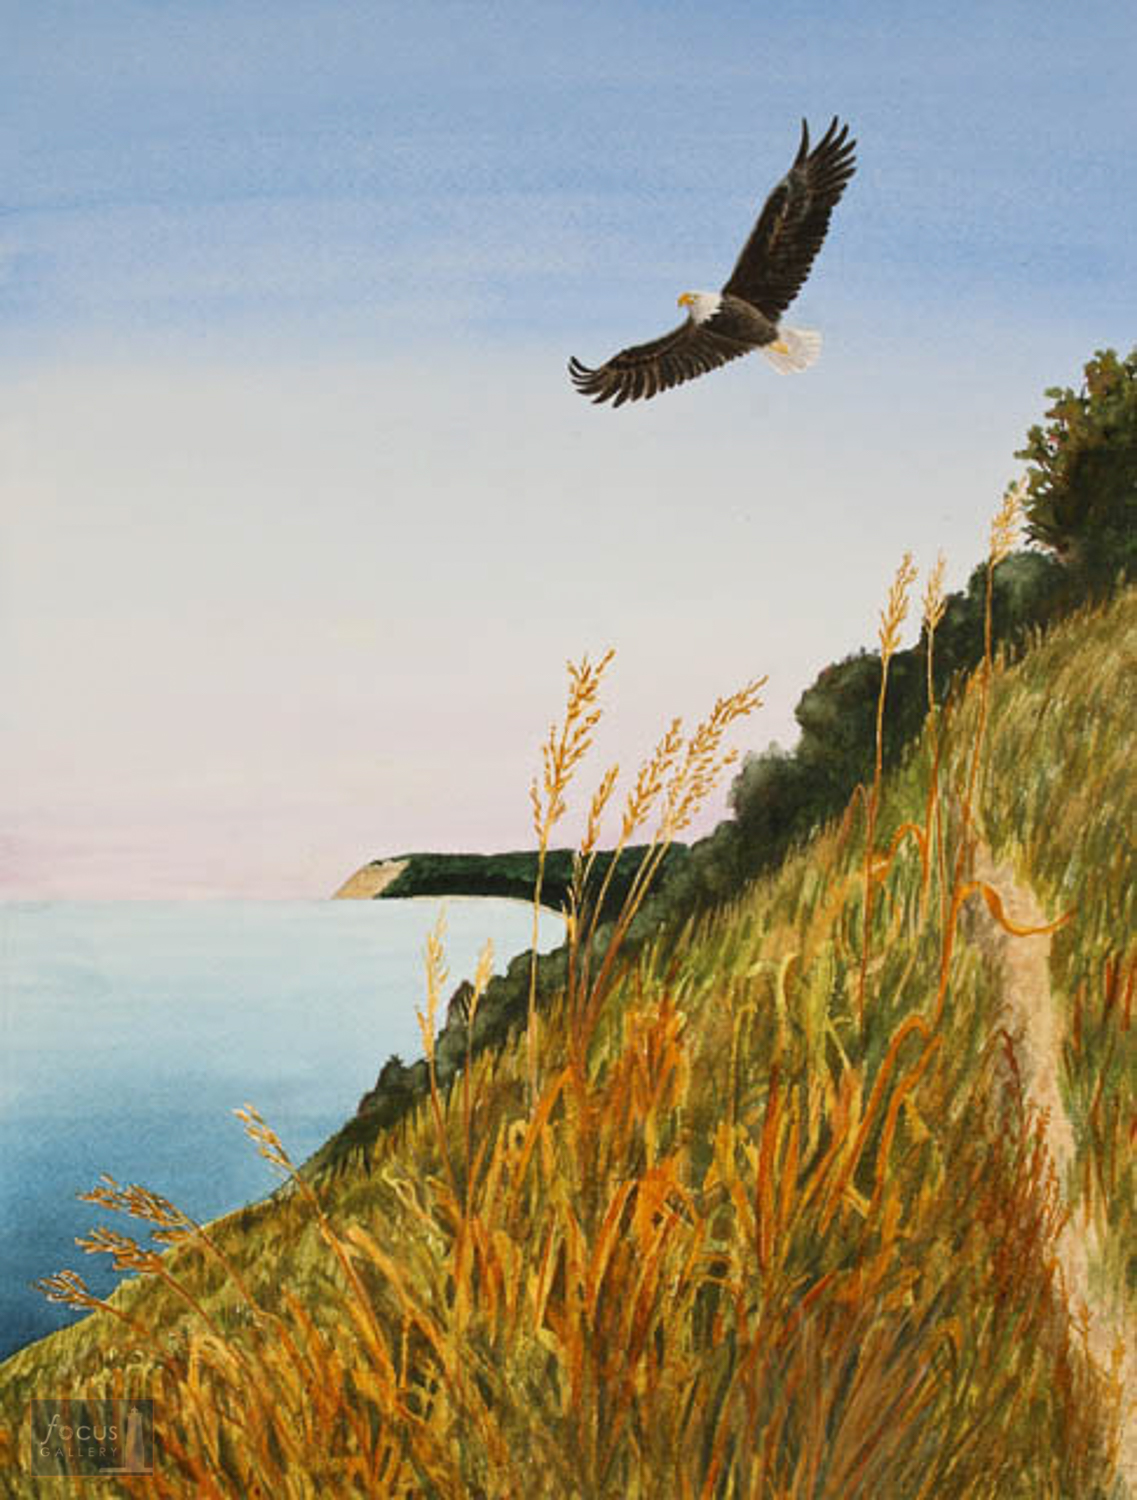 Original watercolor painting of a Bald Eagle soaring over the Empire Bluffs and Sleeping Bear Dunes in Michigan.